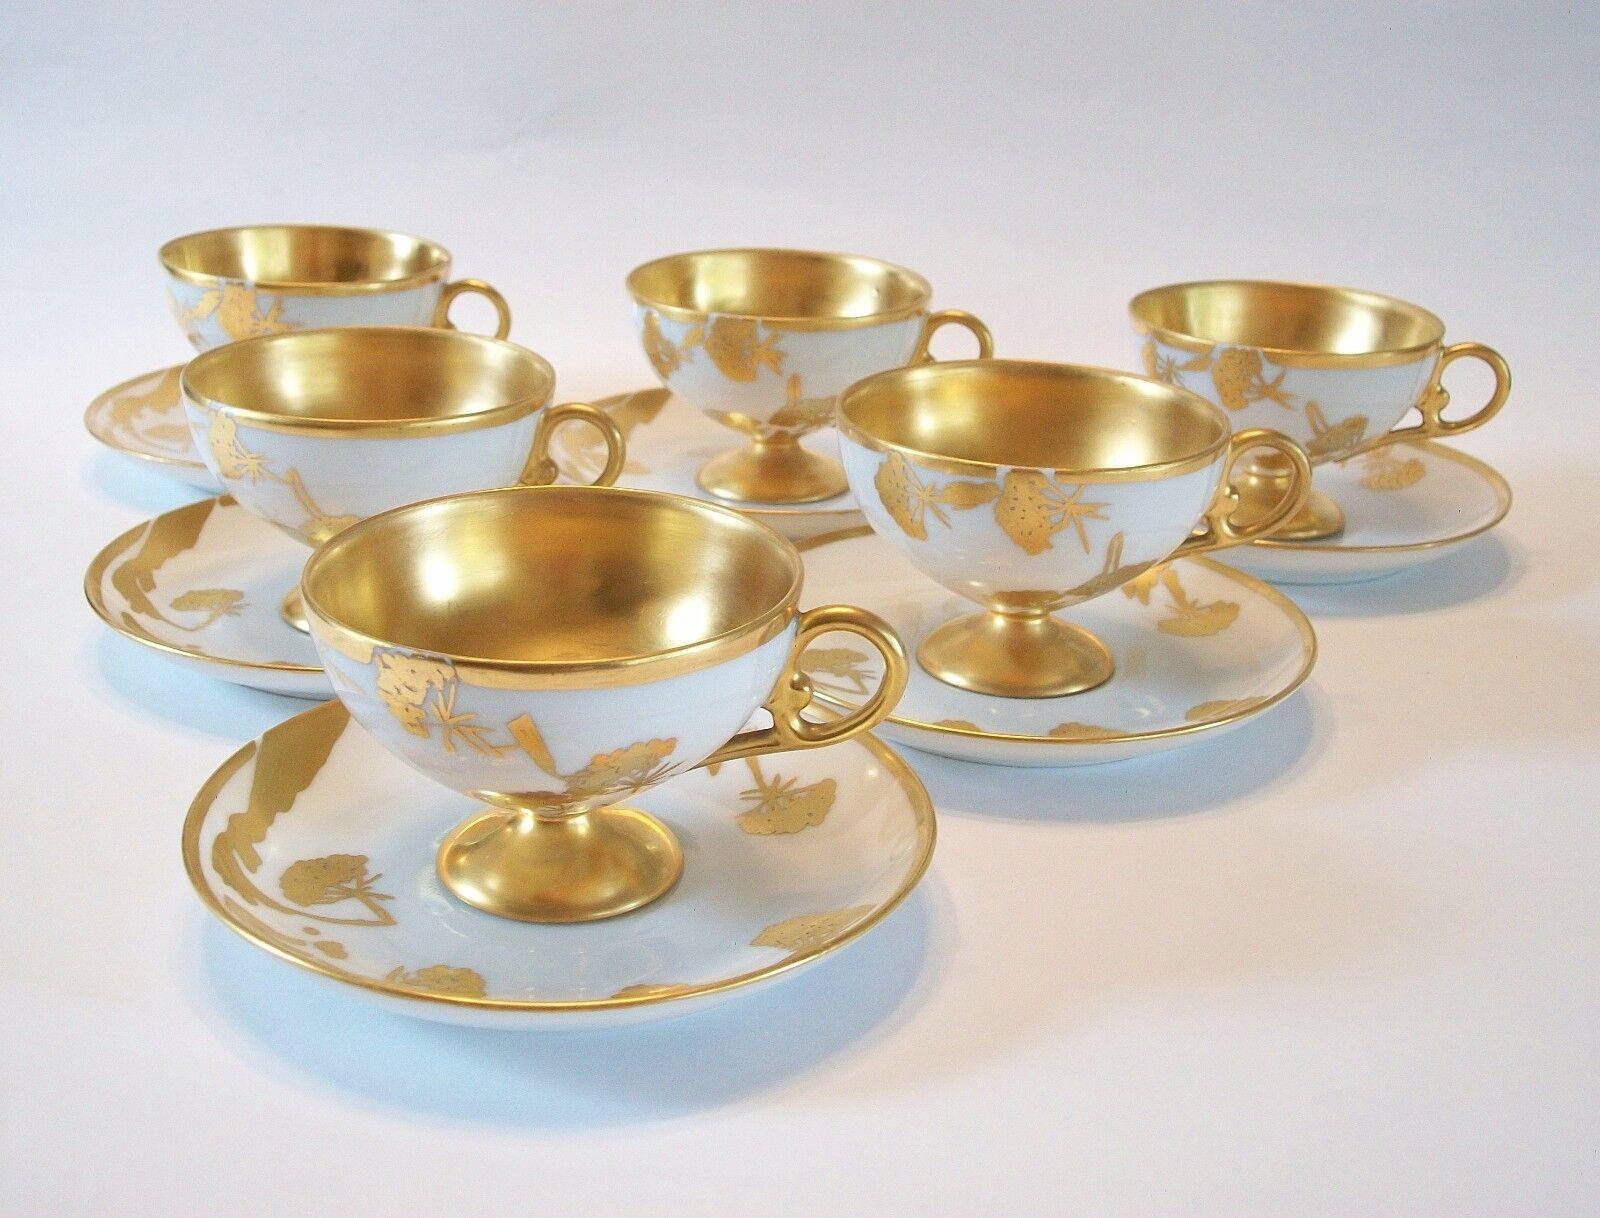 European Continental Gilt Porcelain Cups & Saucers, Hand Painted, Signed, 20th Century